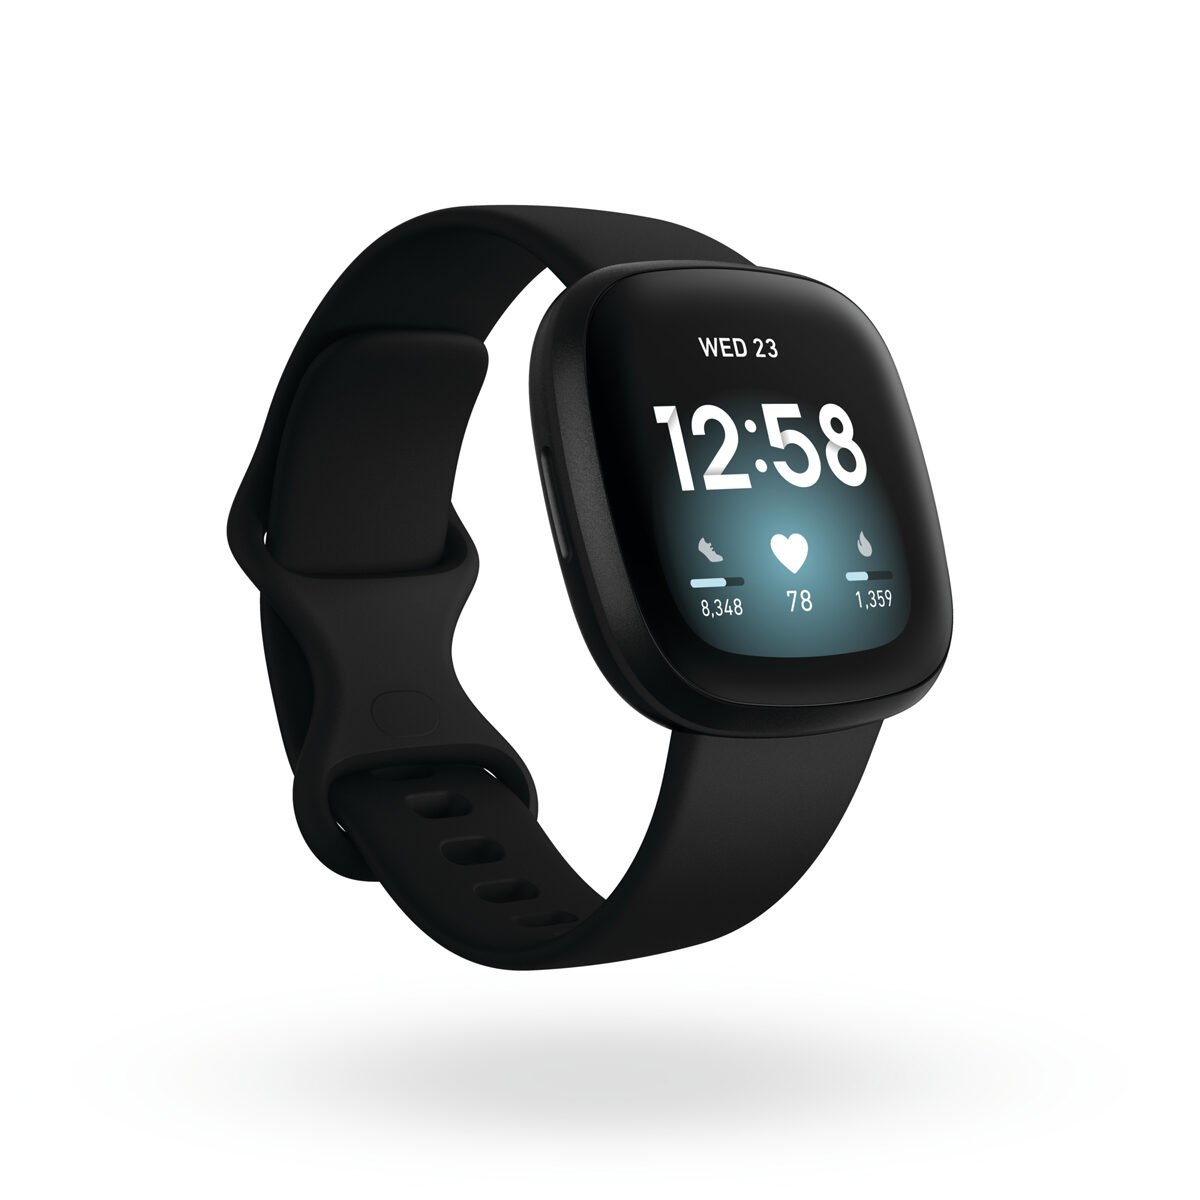 Fitbit OS 5.1